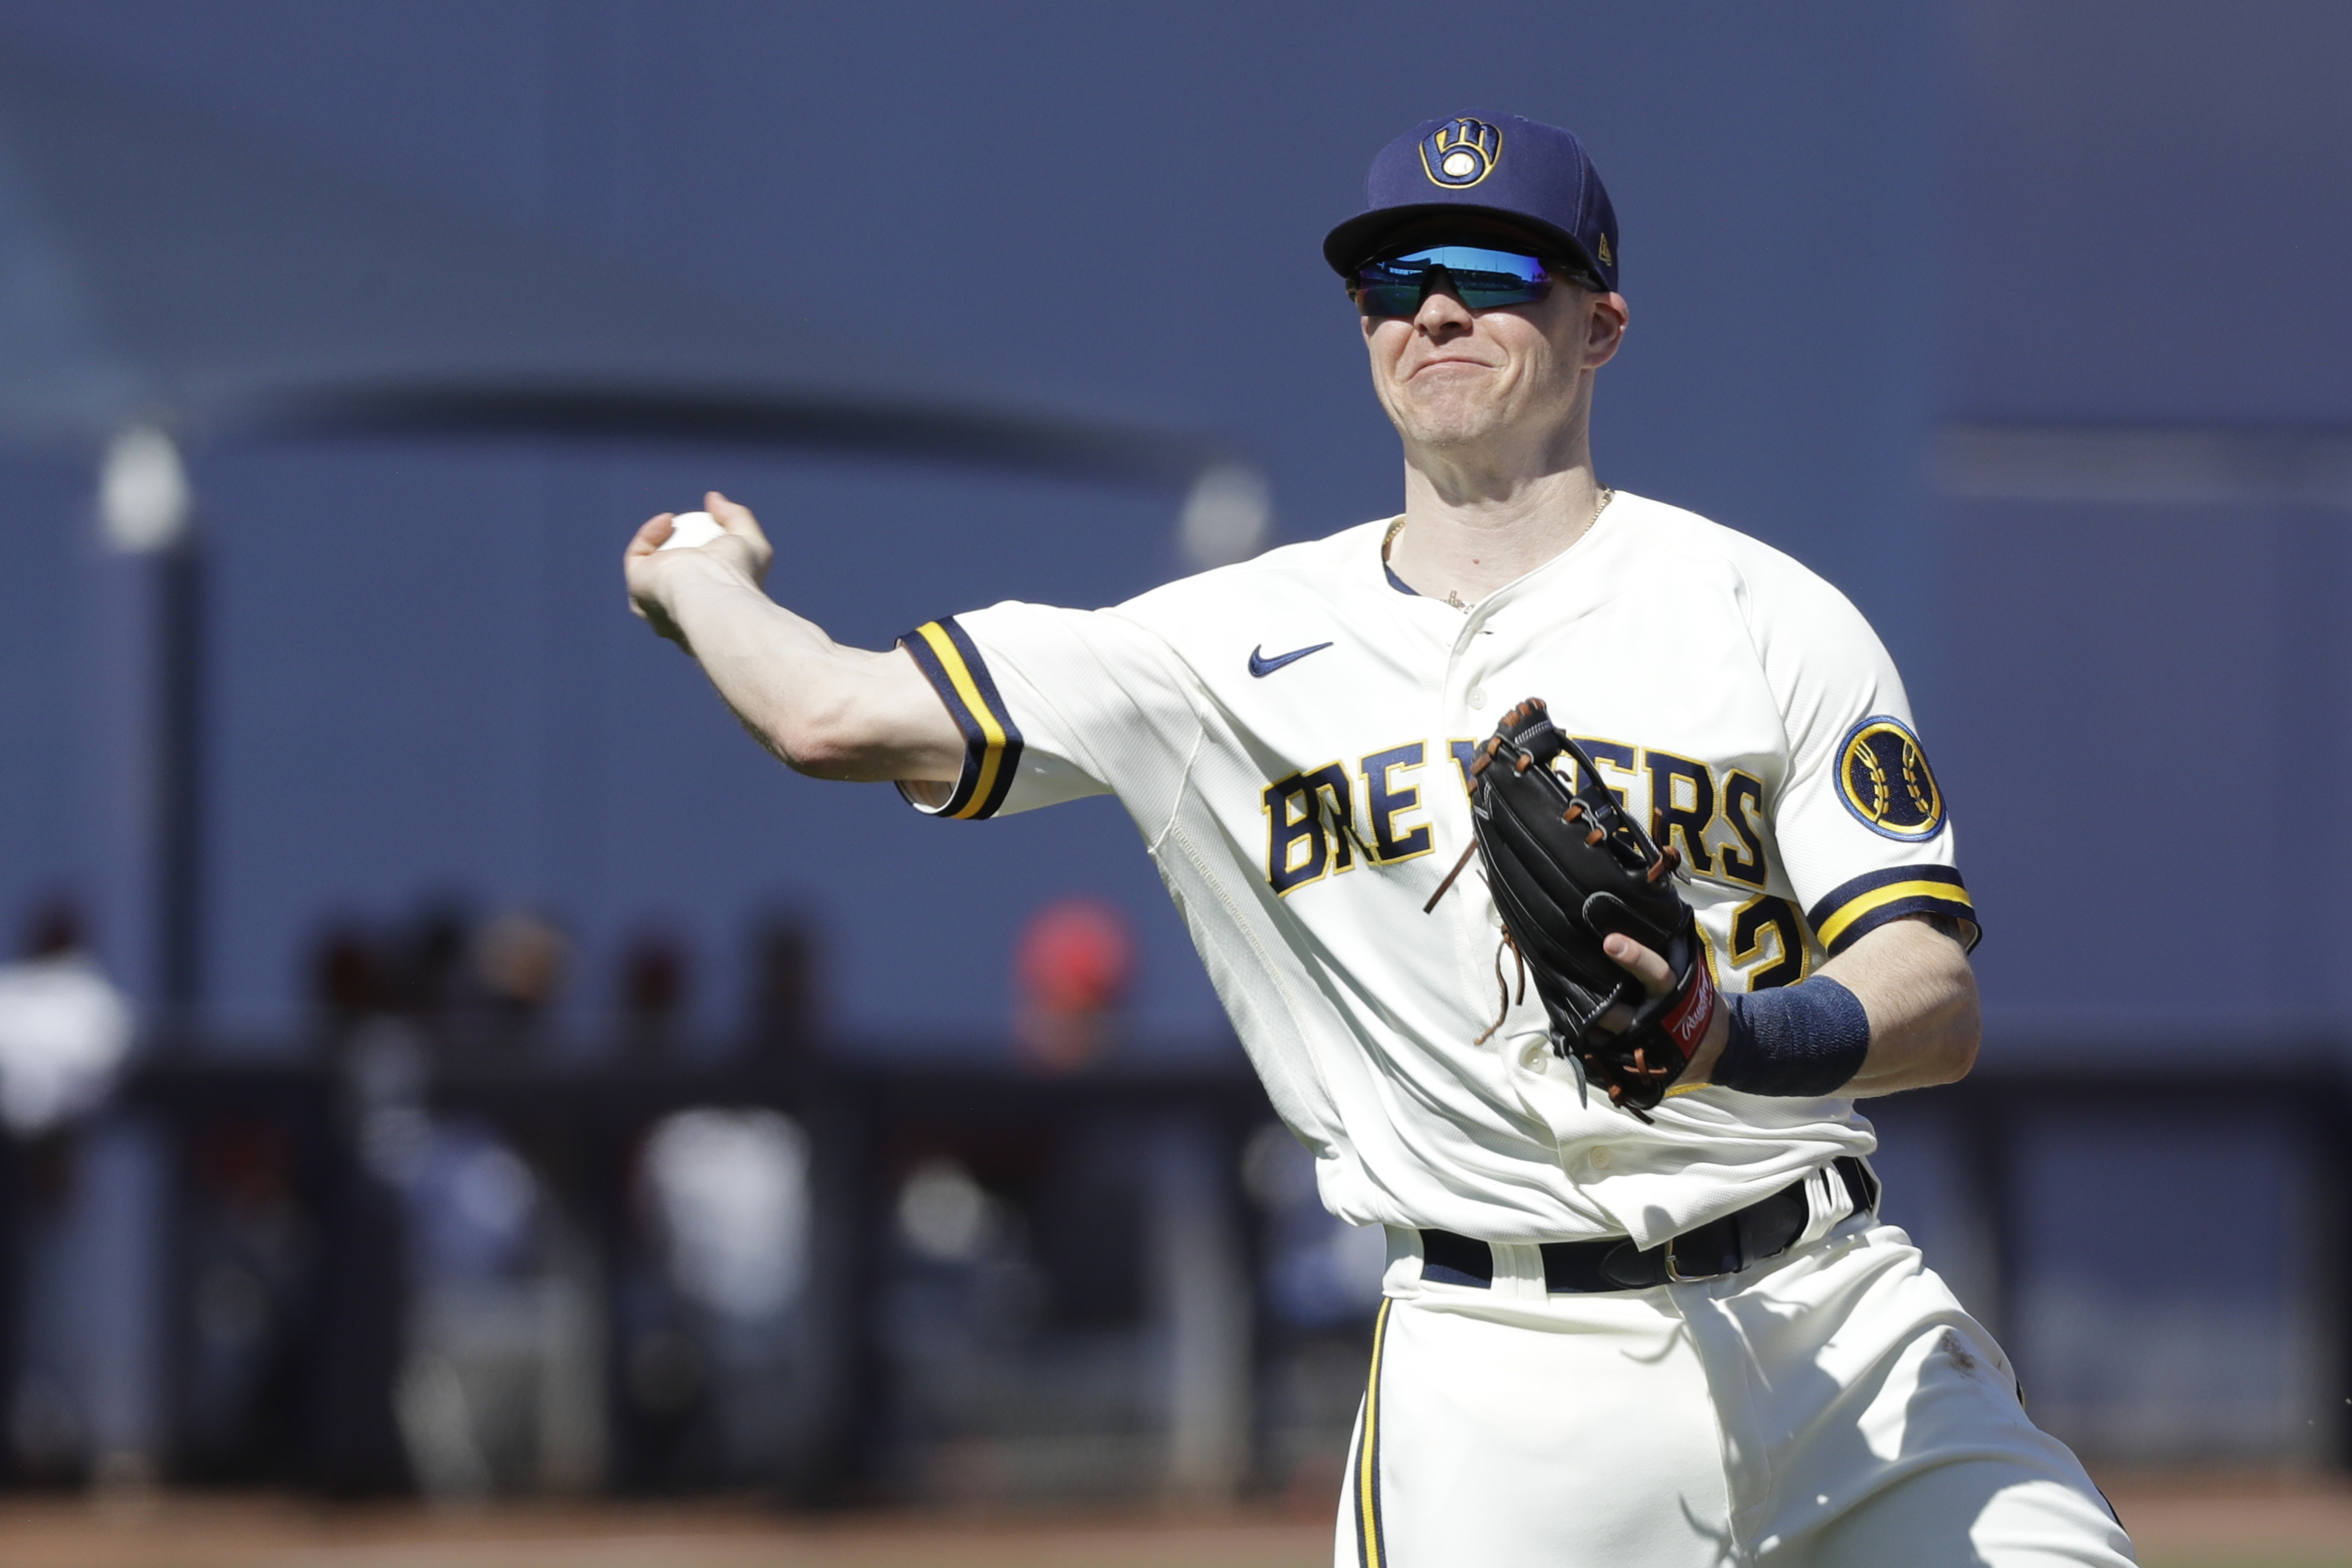 Report: Red Sox utility man Brock Holt in agreement with Brewers